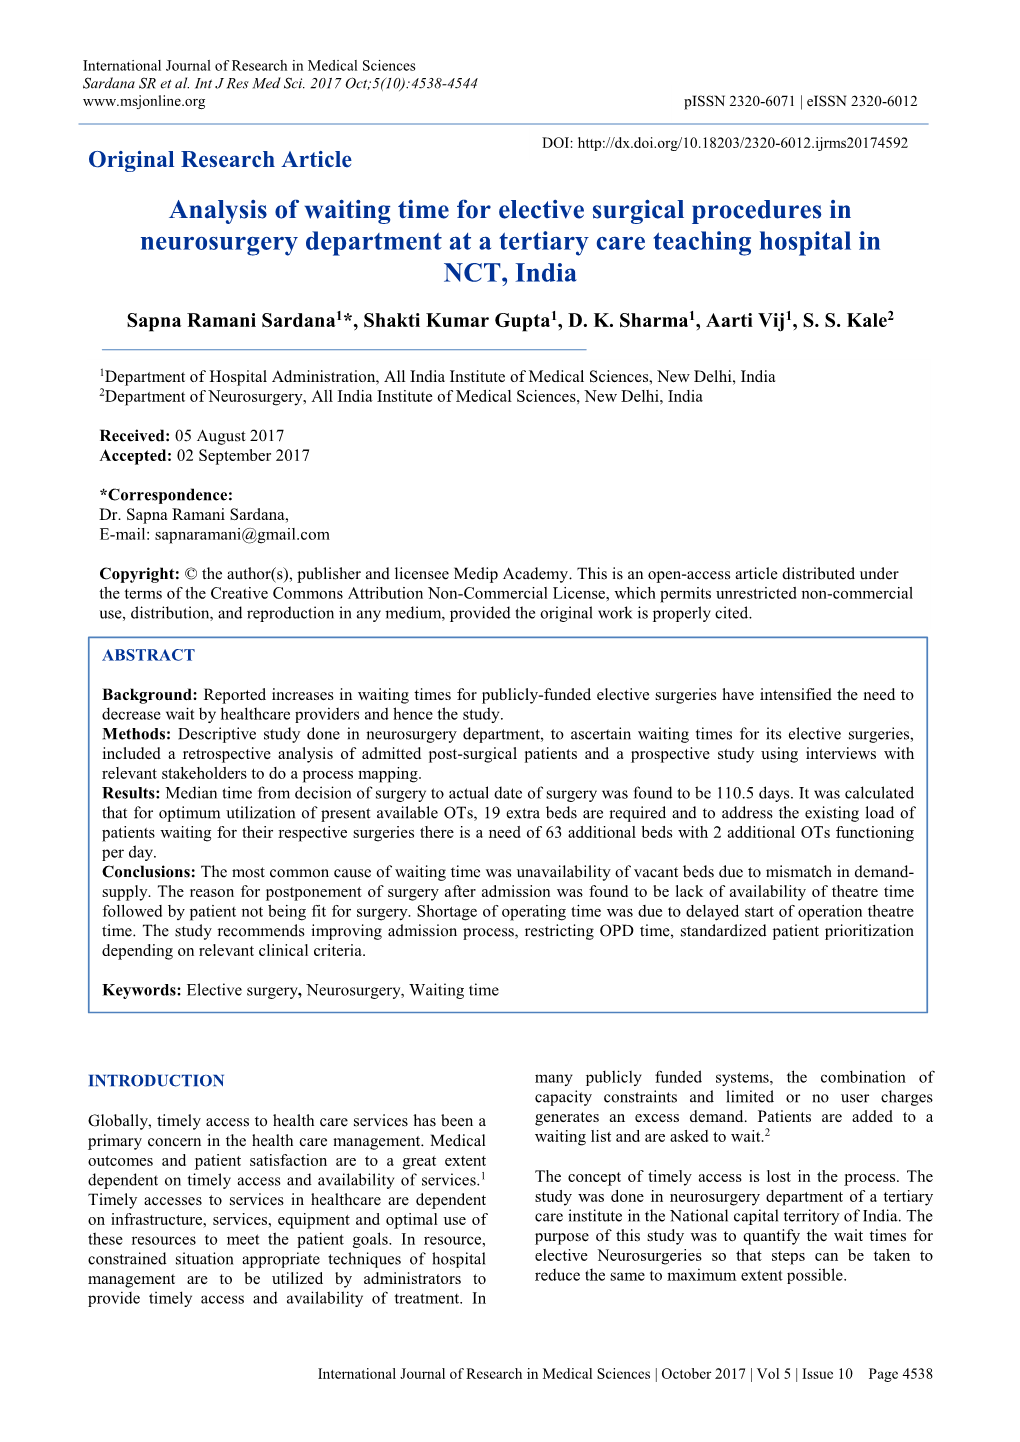 Analysis of Waiting Time for Elective Surgical Procedures in Neurosurgery Department at a Tertiary Care Teaching Hospital in NCT, India